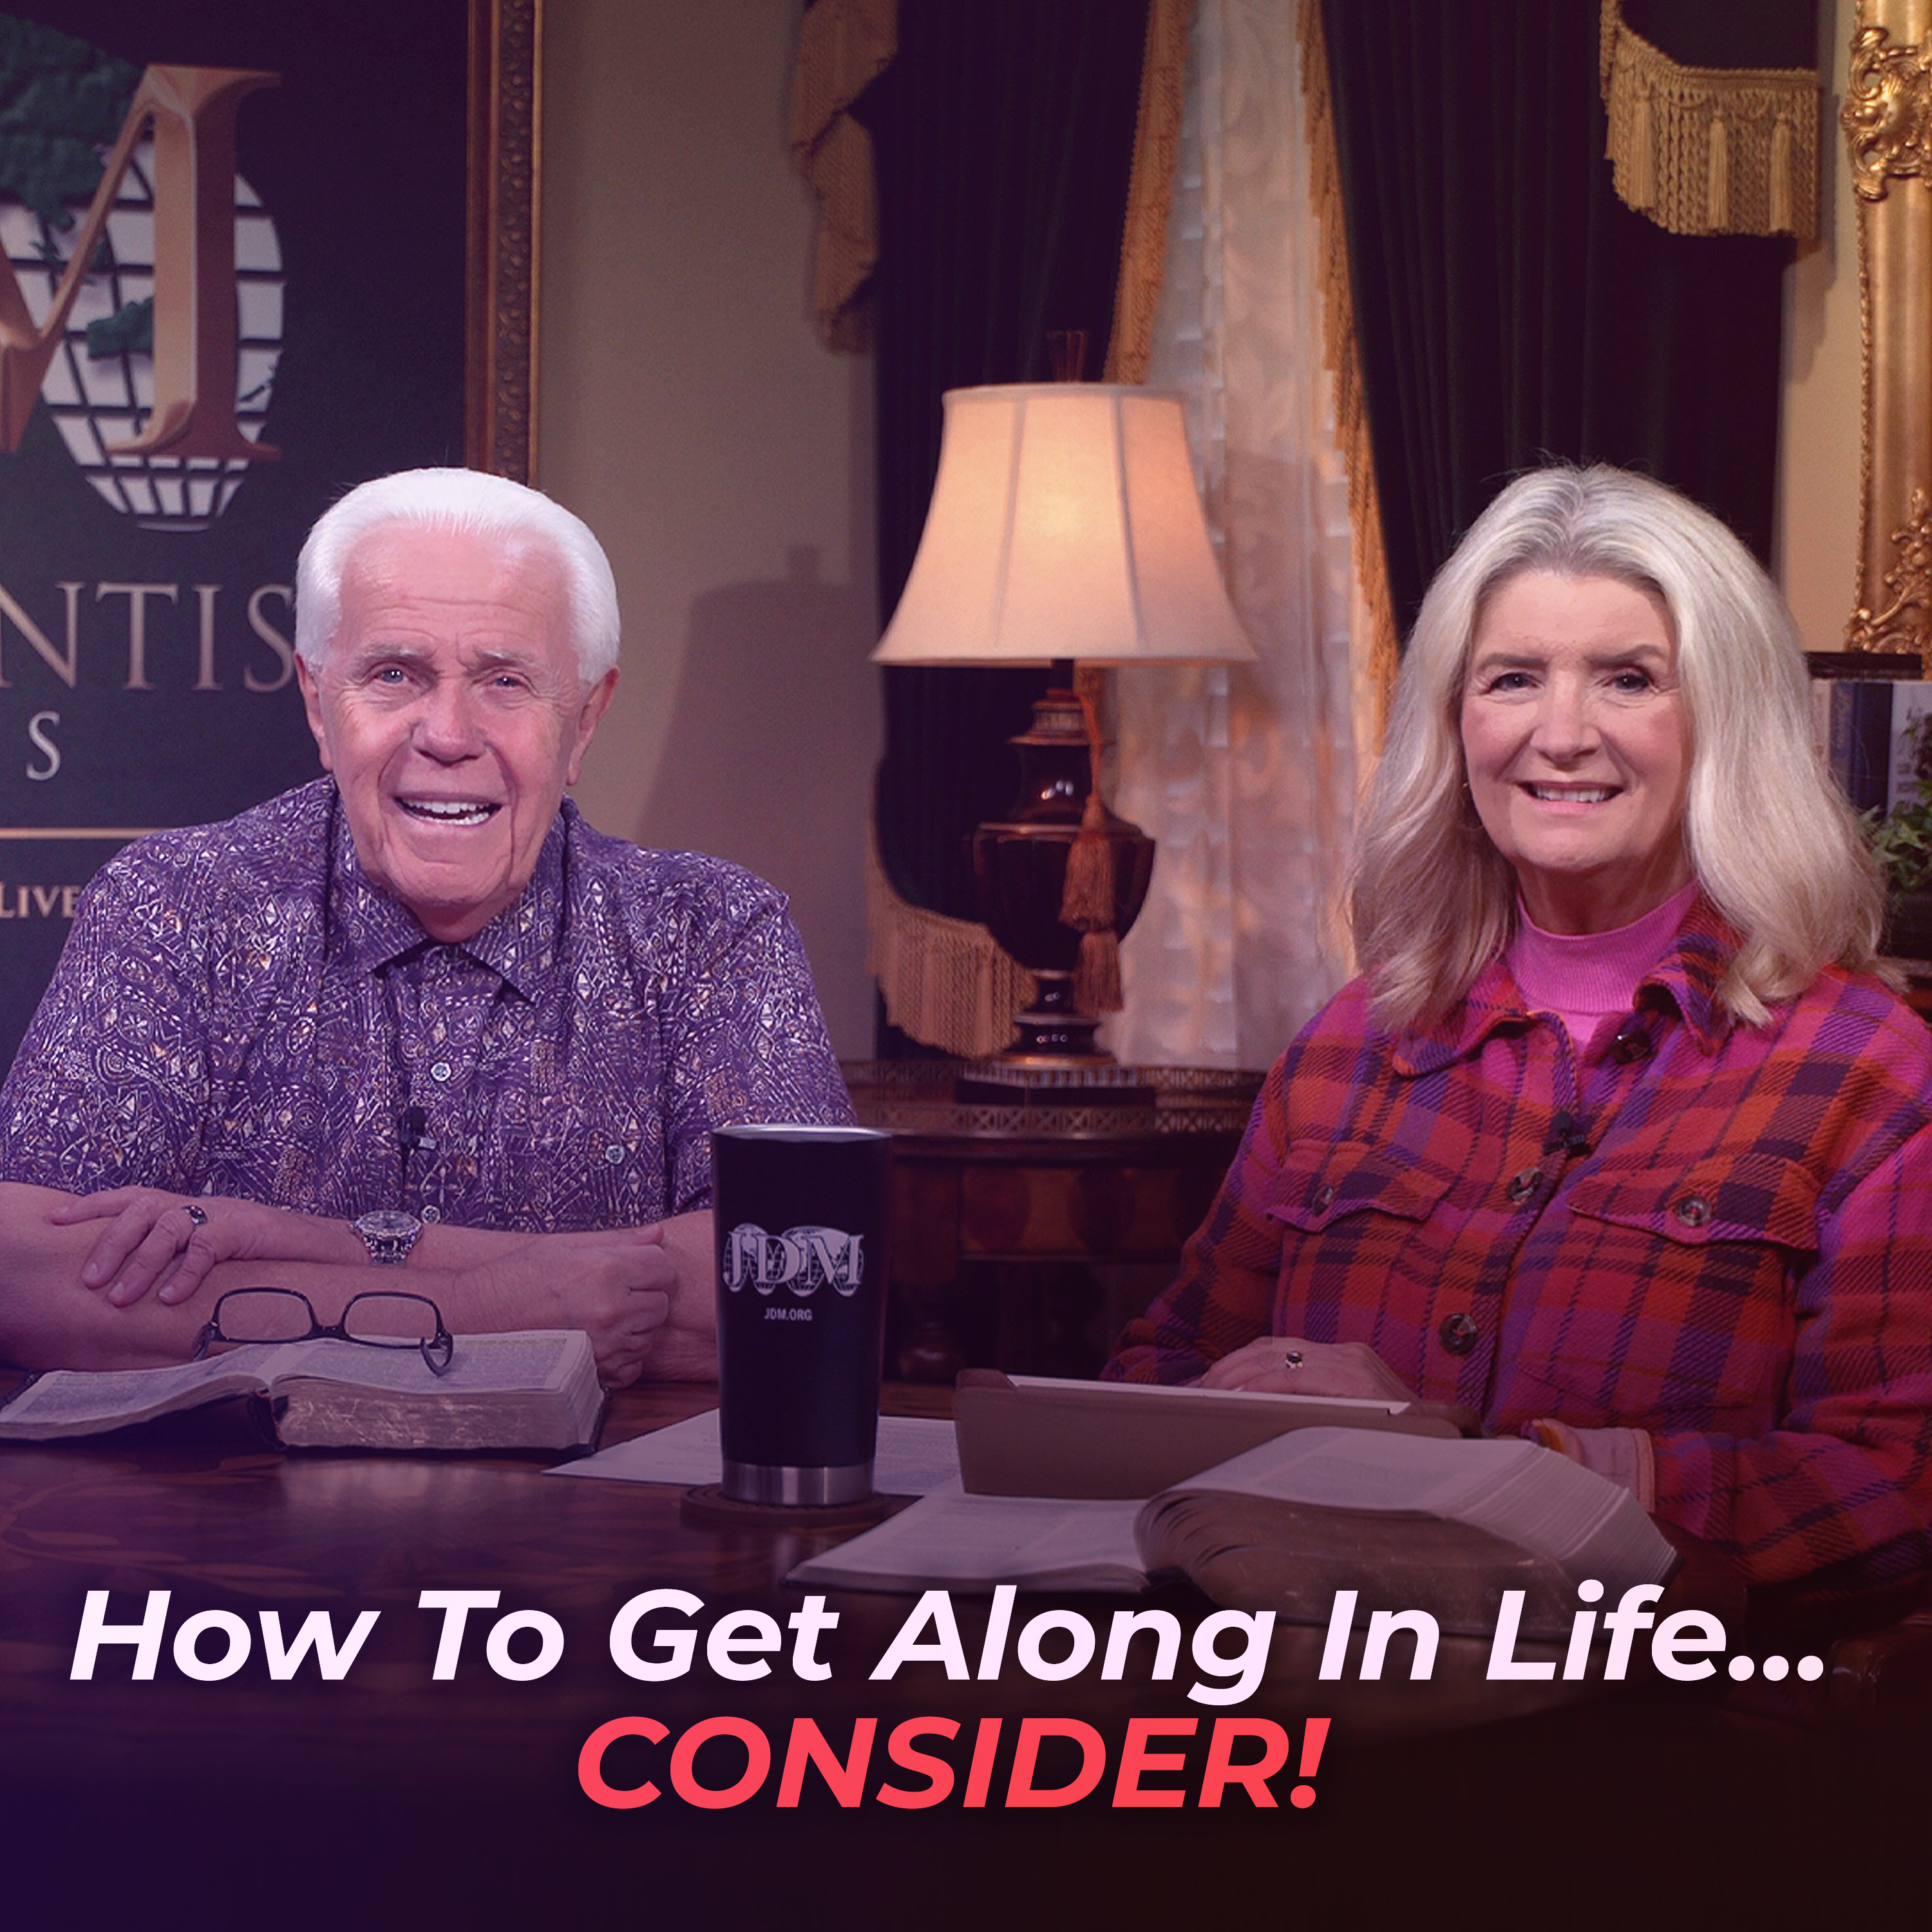 How To Get Along In Life…CONSIDER!